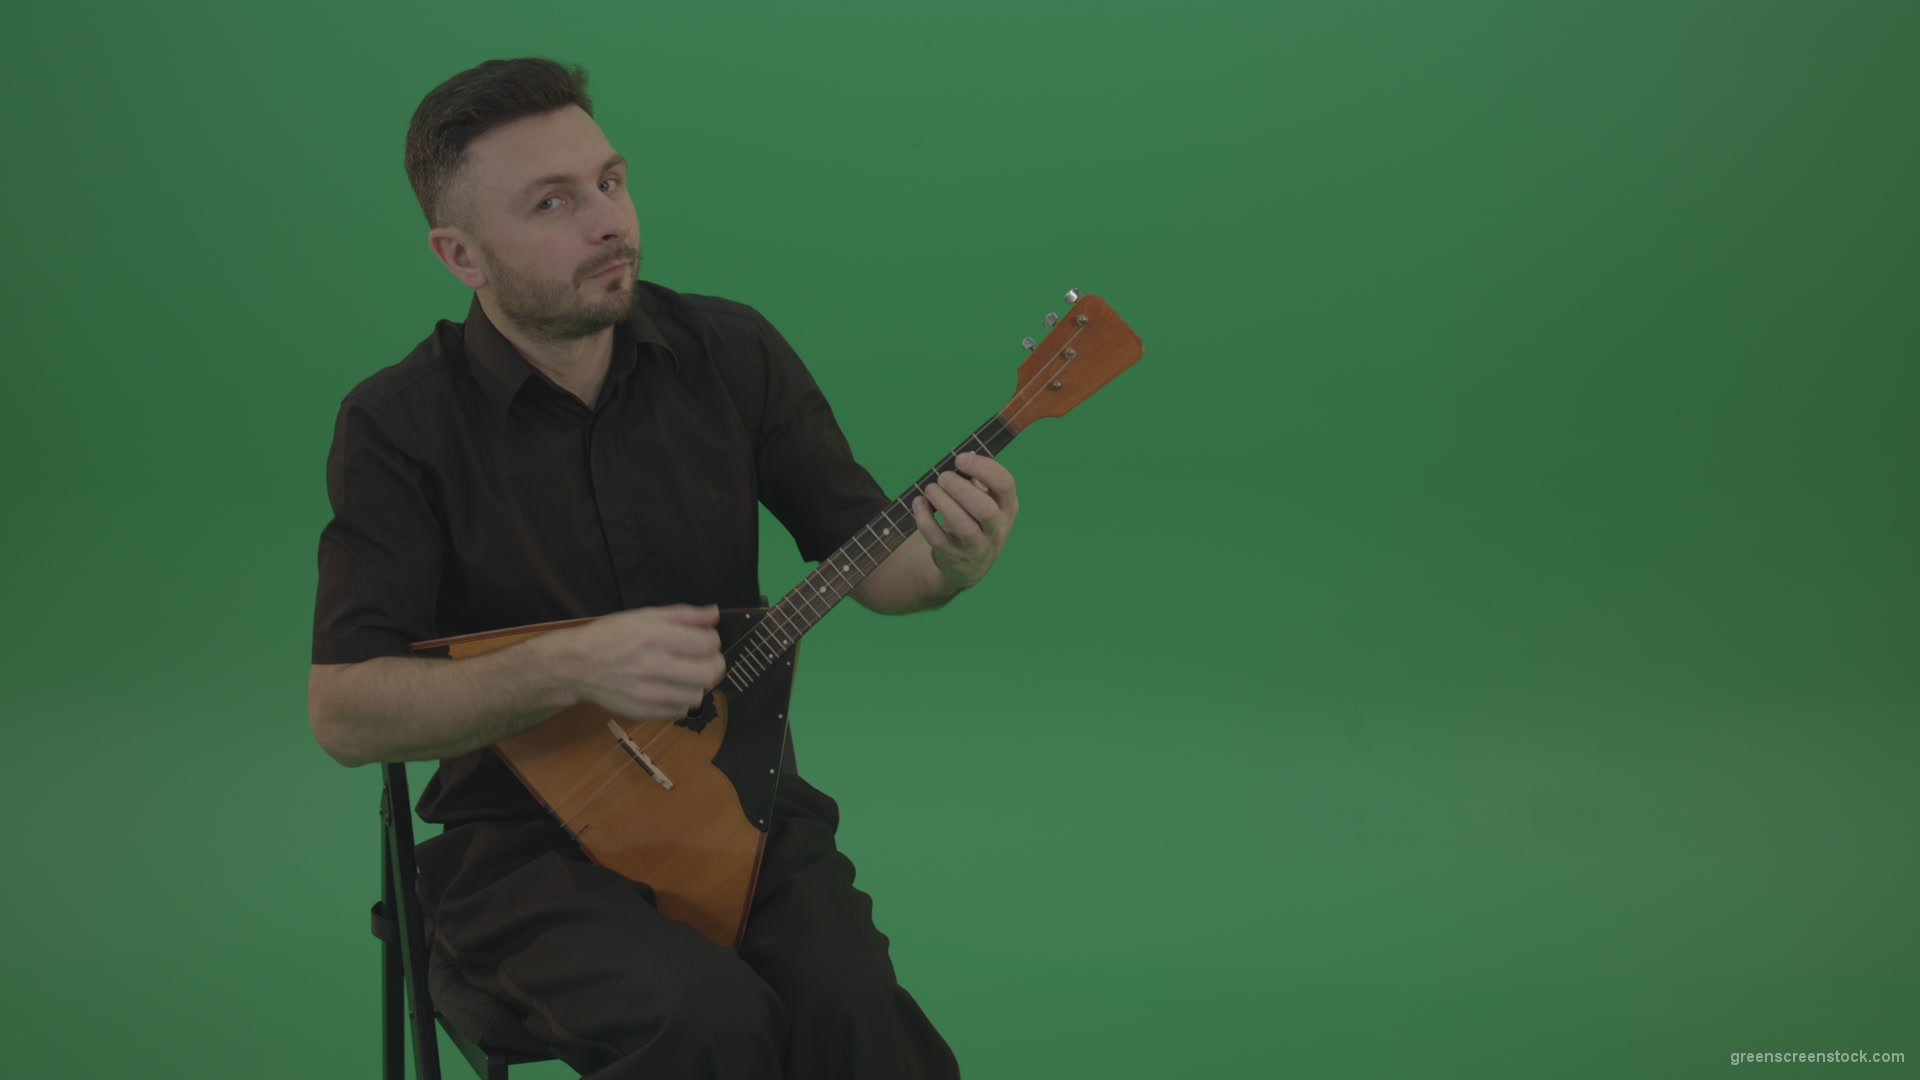 Funny-Balalaika-music-player-in-black-wear-playing-in-wedding-isolated-on-green-screen-background_002 Green Screen Stock